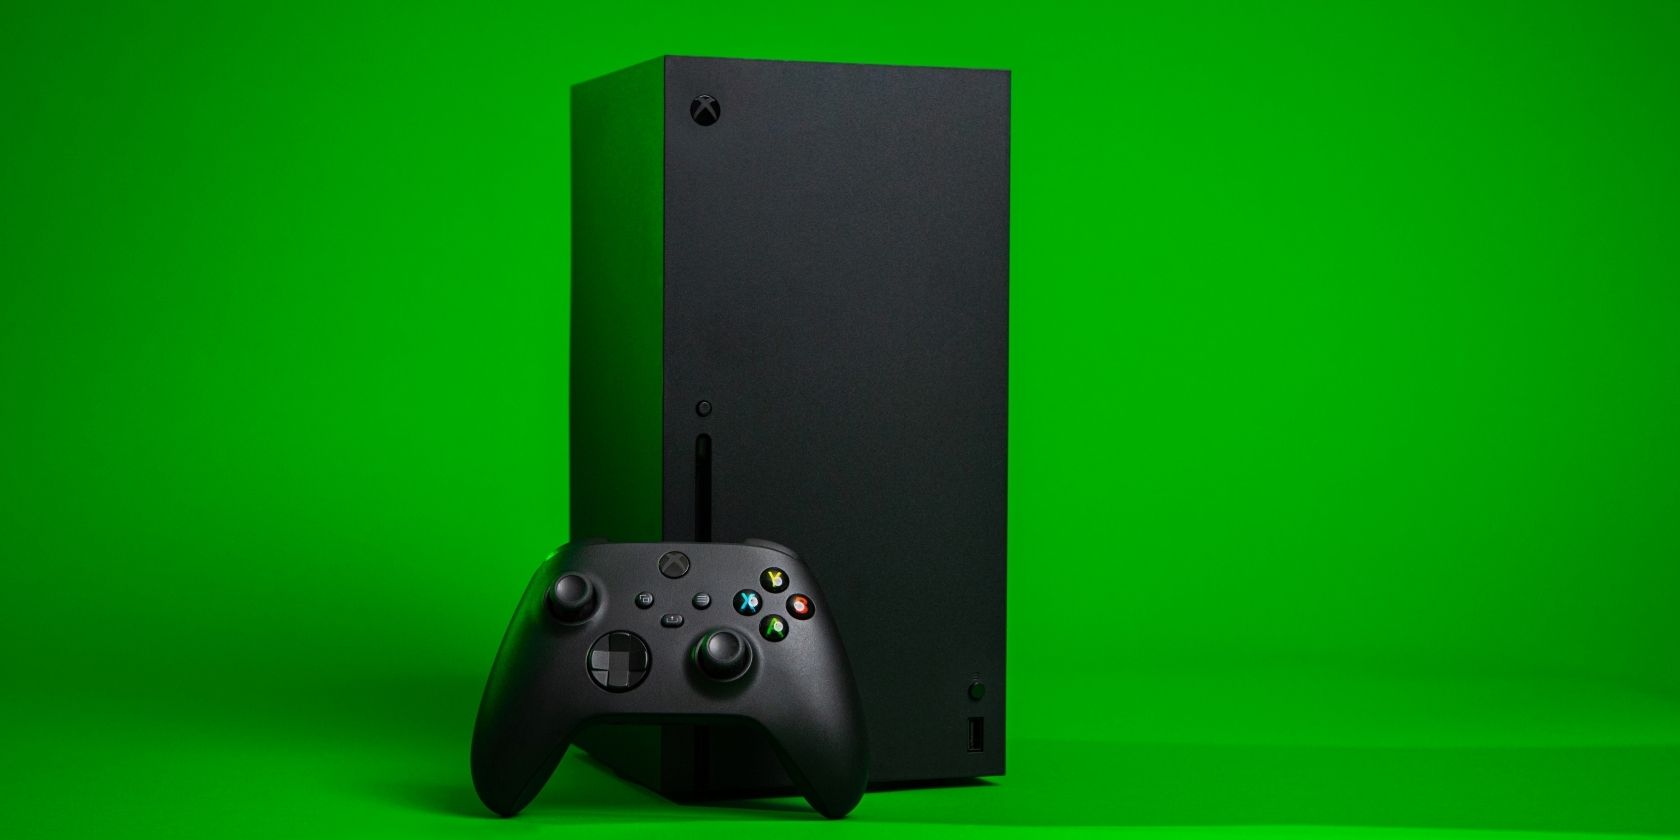 How to Set Up and Use Parental Controls on Your Xbox Series X|S